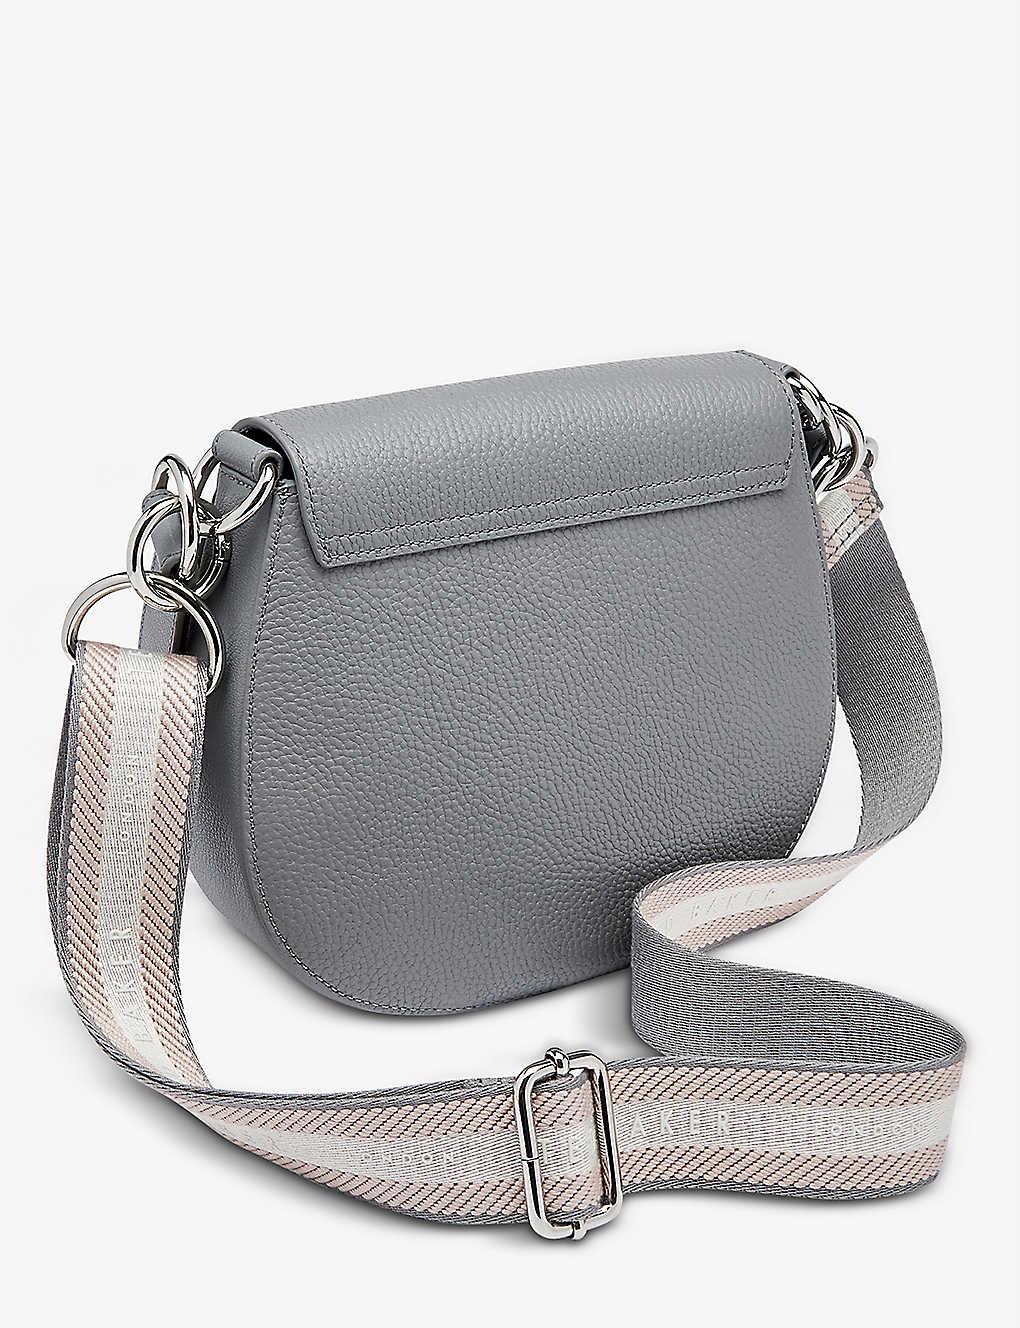 Ted Baker Amali Leather Cross-body Bag in Gray | Lyst